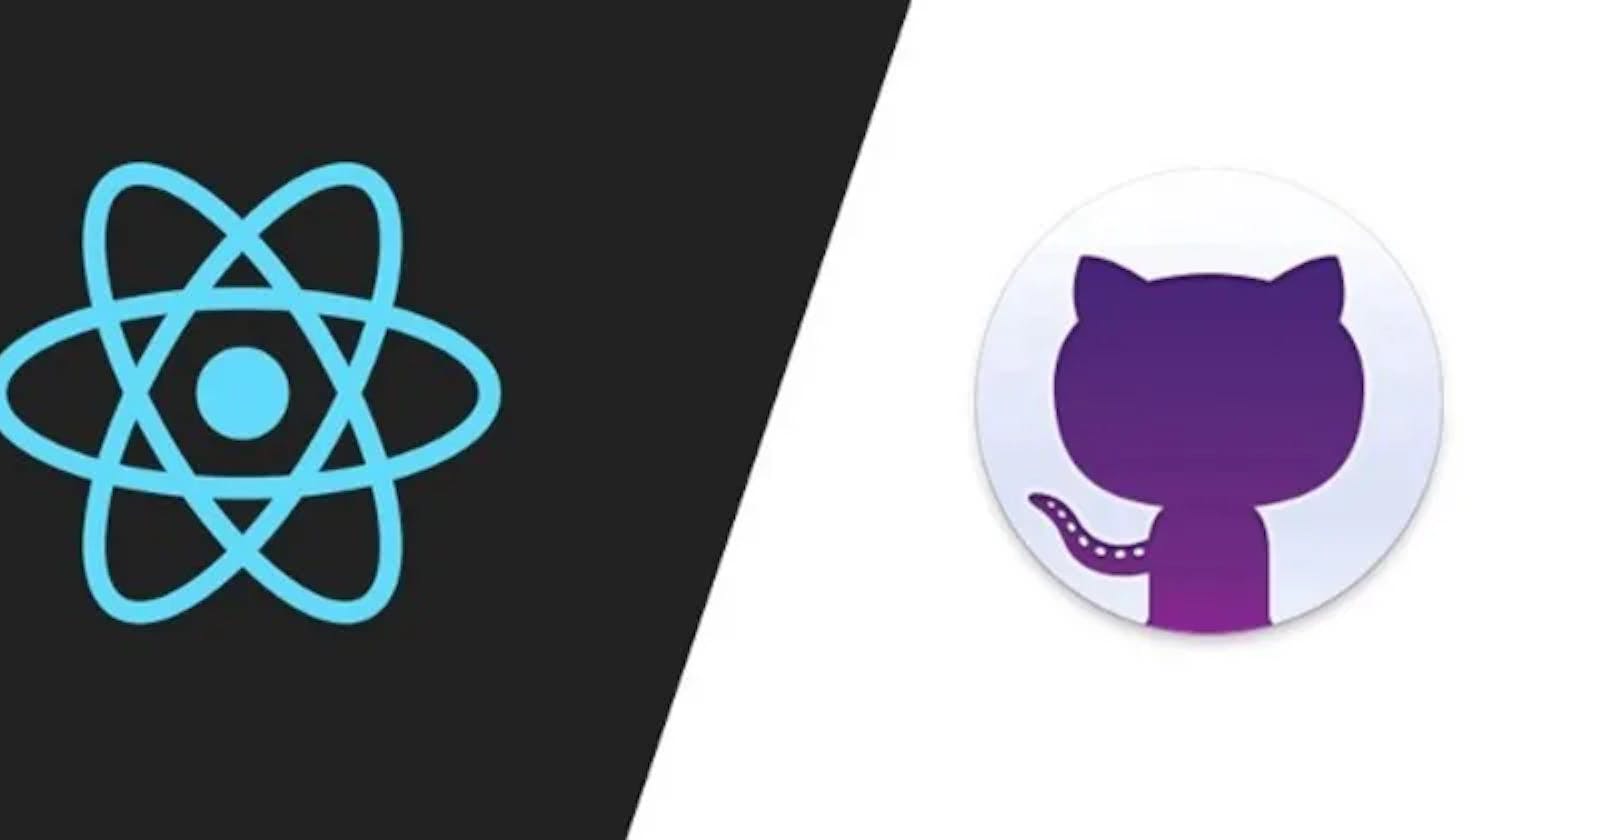 Deploy your React app using GitHub pages